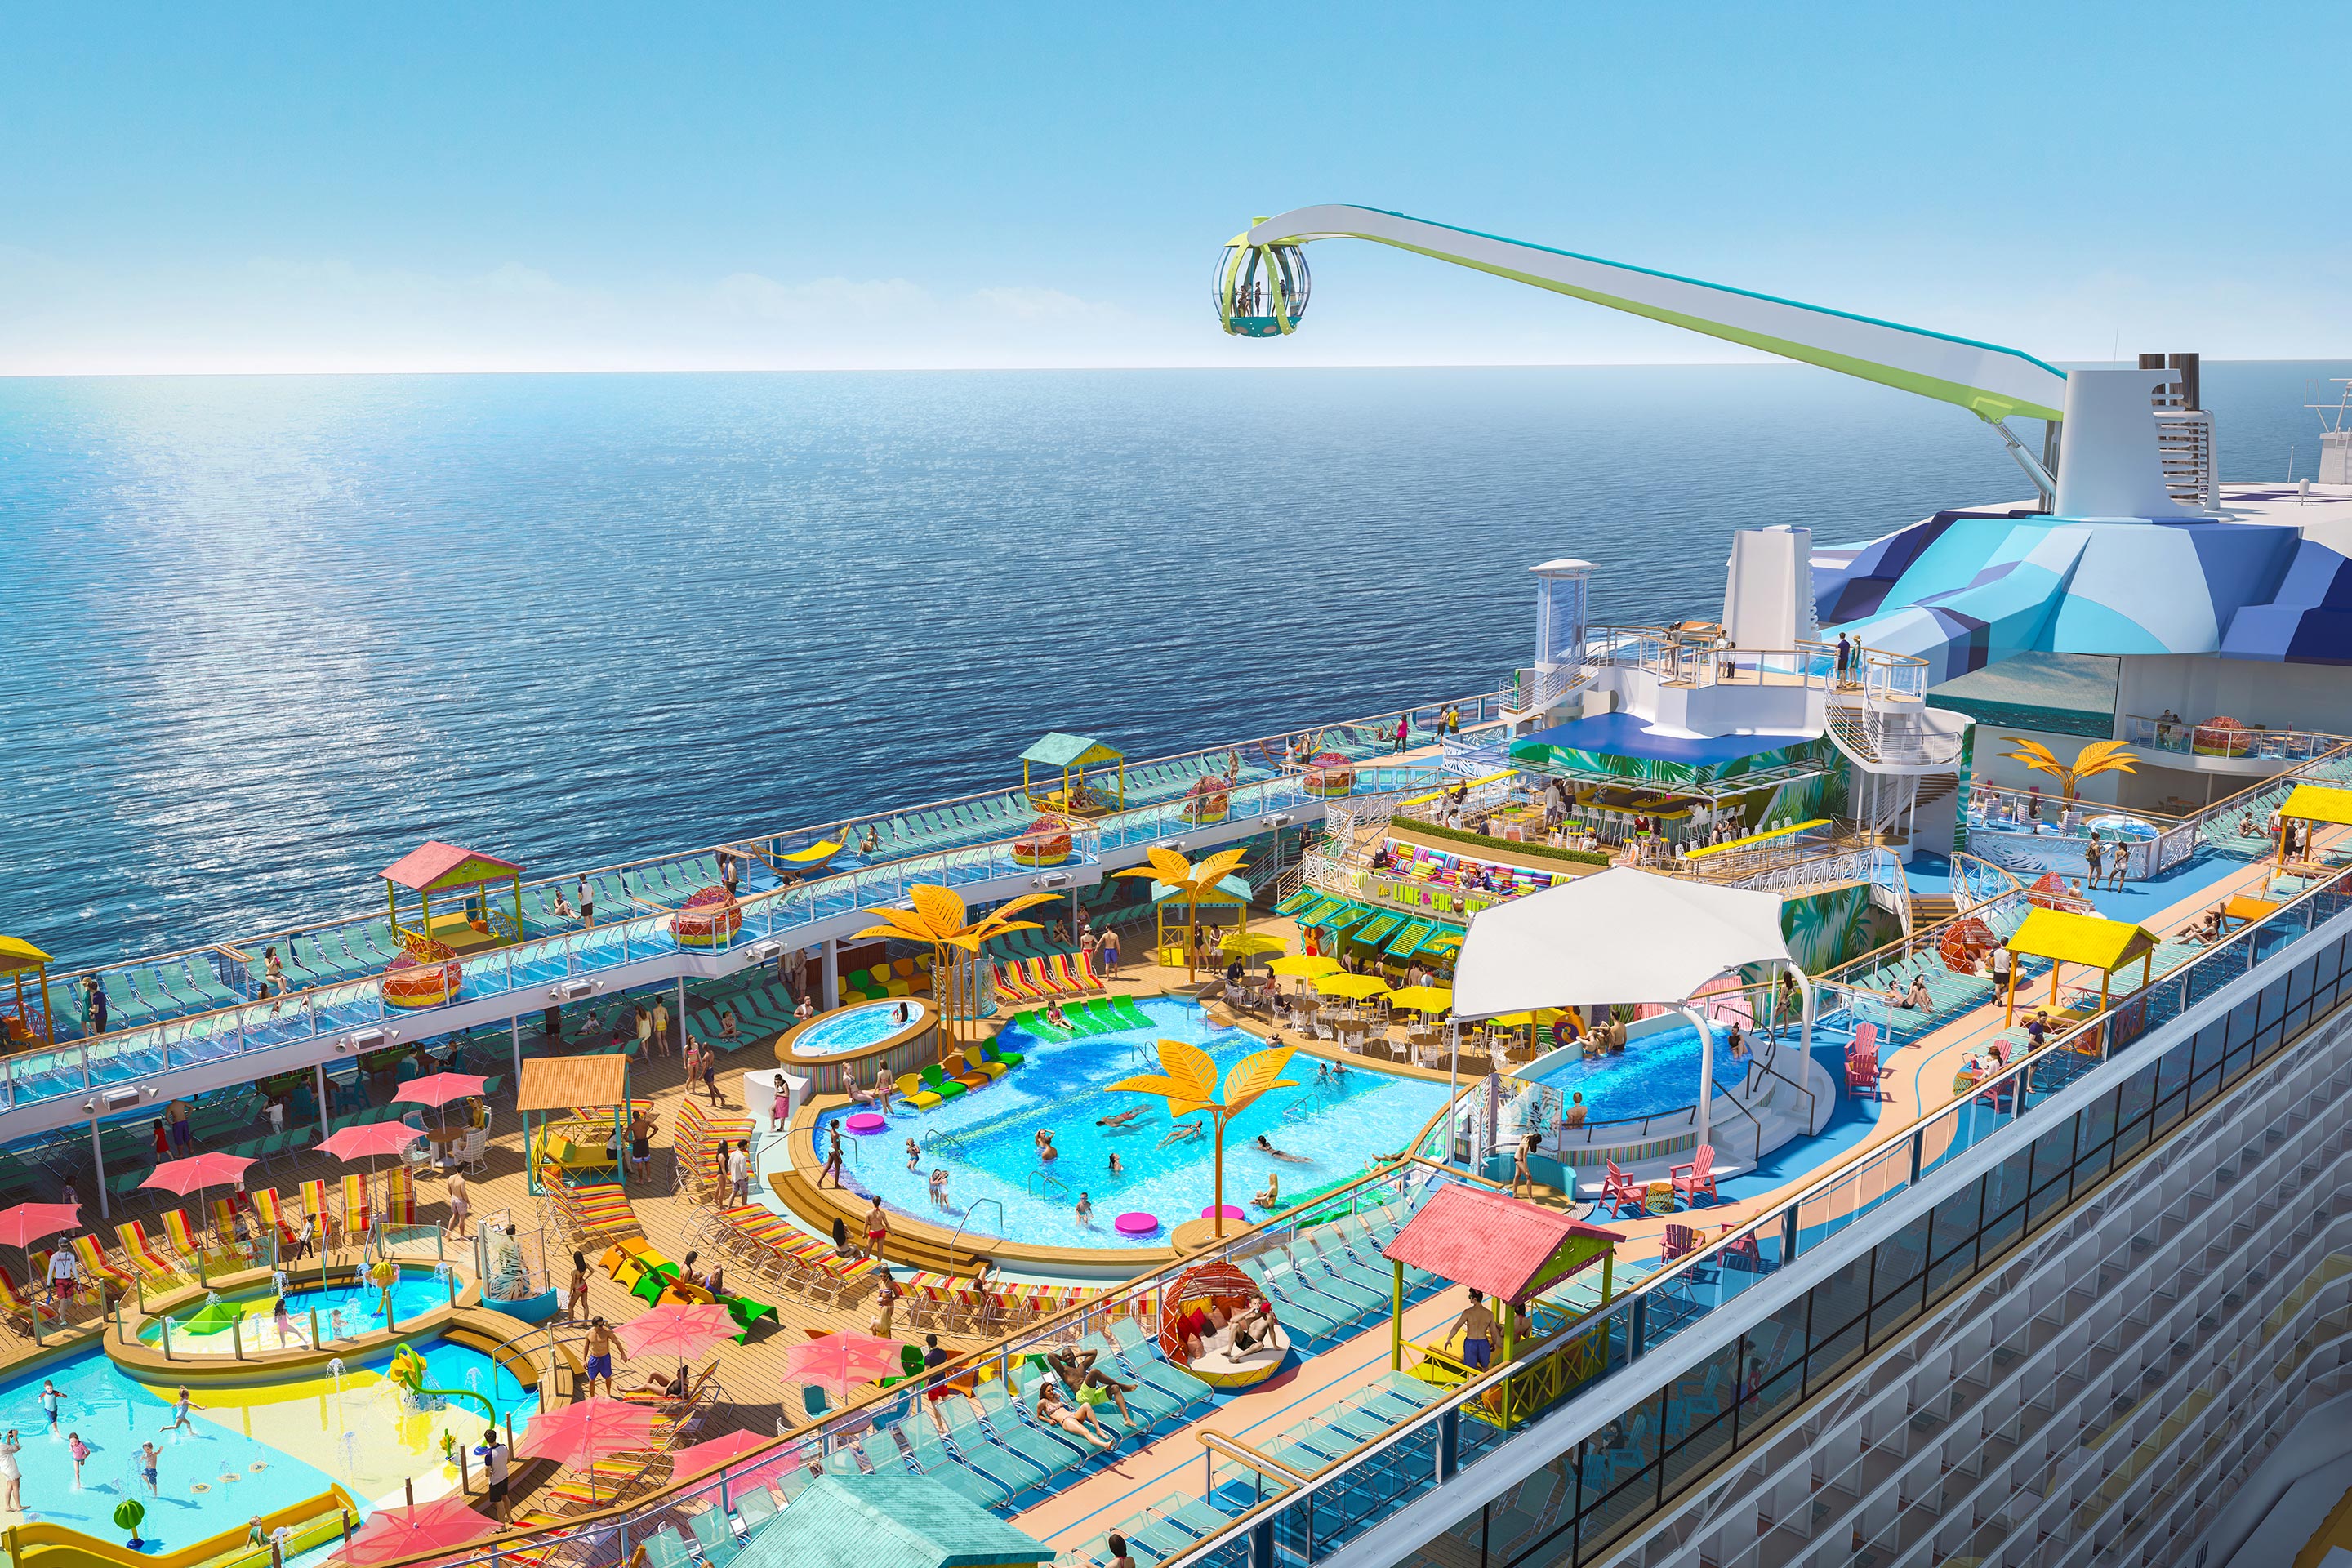 Odyssey of the Seas Pool Deck and North Star